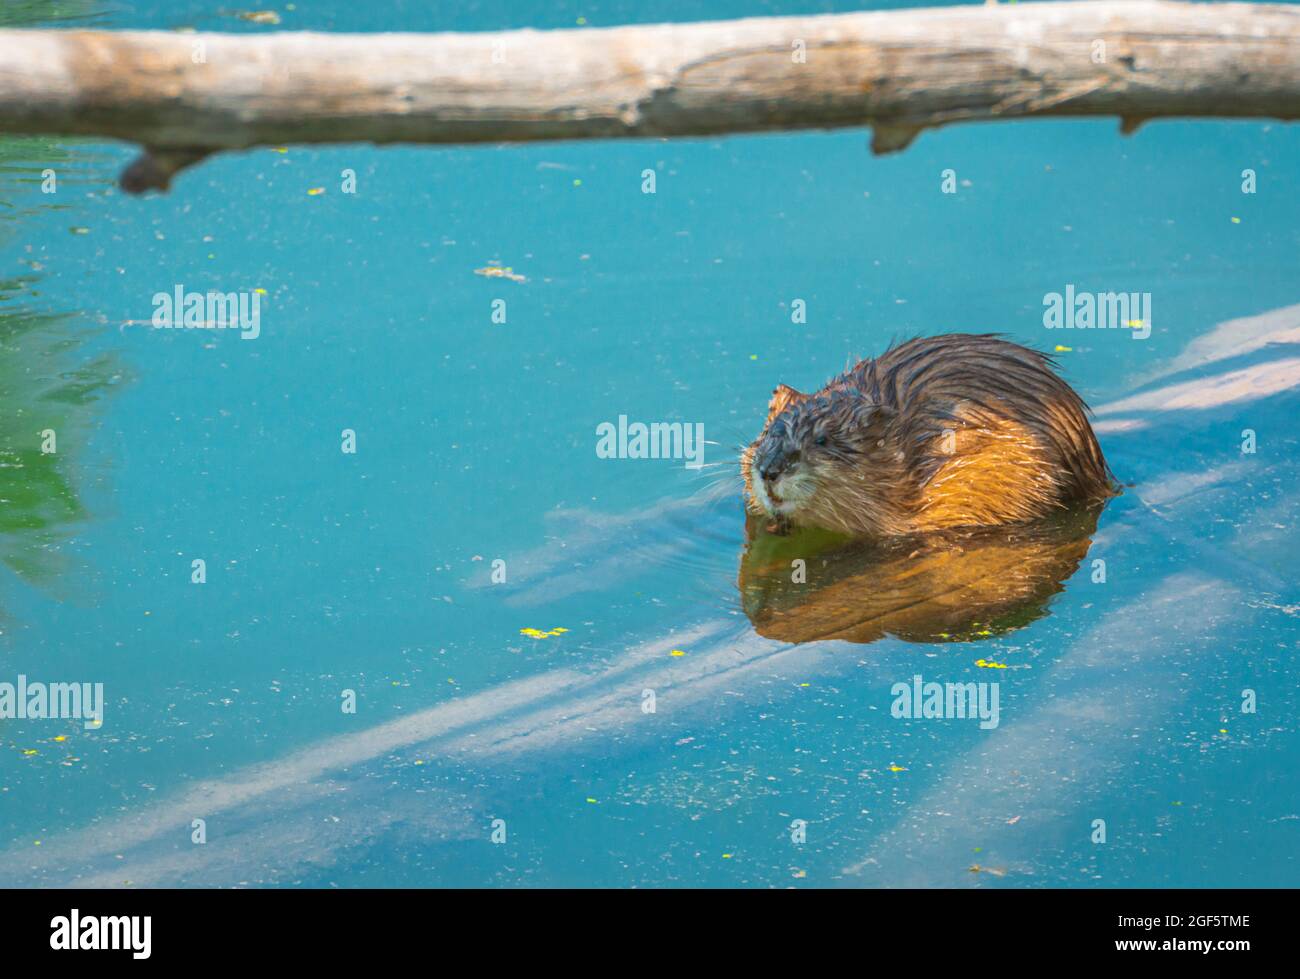 Muskrat rests on submerged log & shade of overhead Cottonwood branch in wetlands pond habitat of East Plum Creek in summer, Castle Rock Colorado USA. Stock Photo